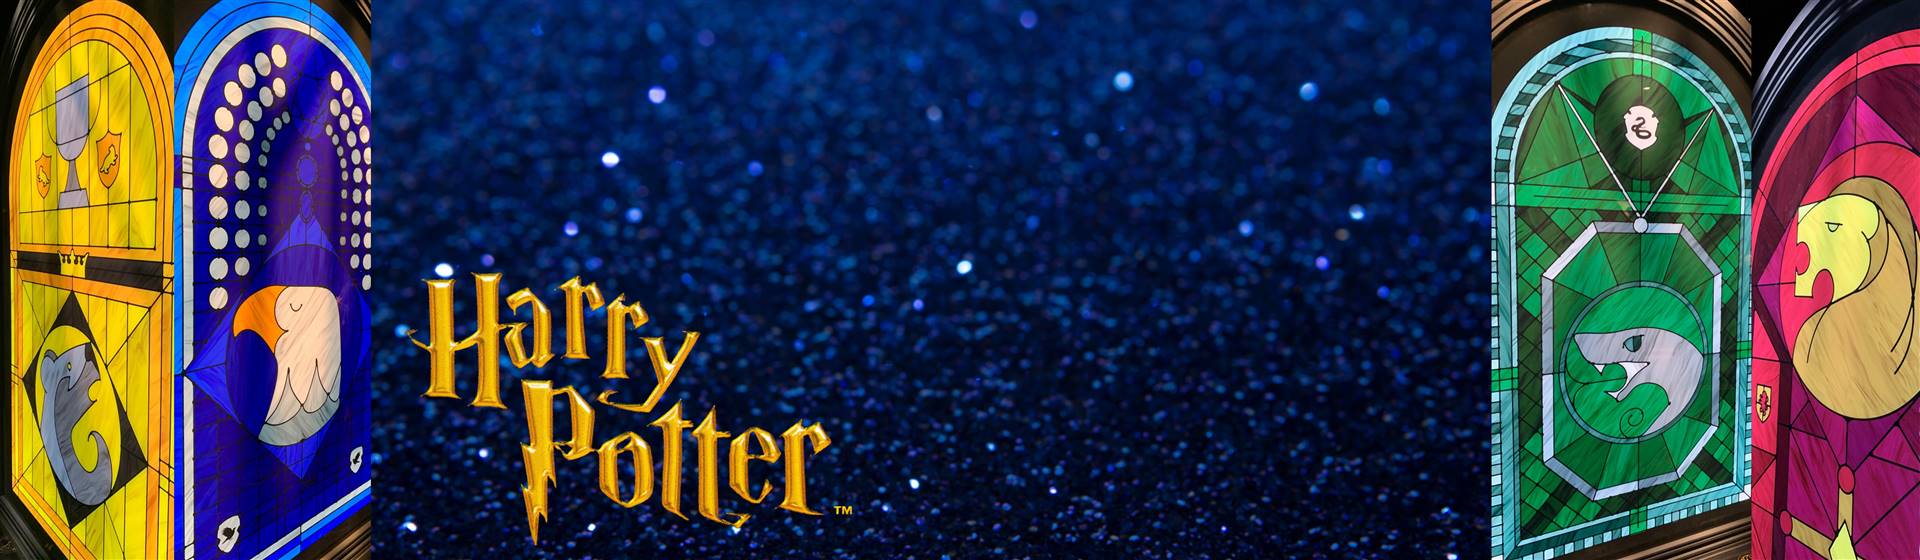 Experience the magic of Harry Potter & the Exhibition. There is so much to see and do in the city.